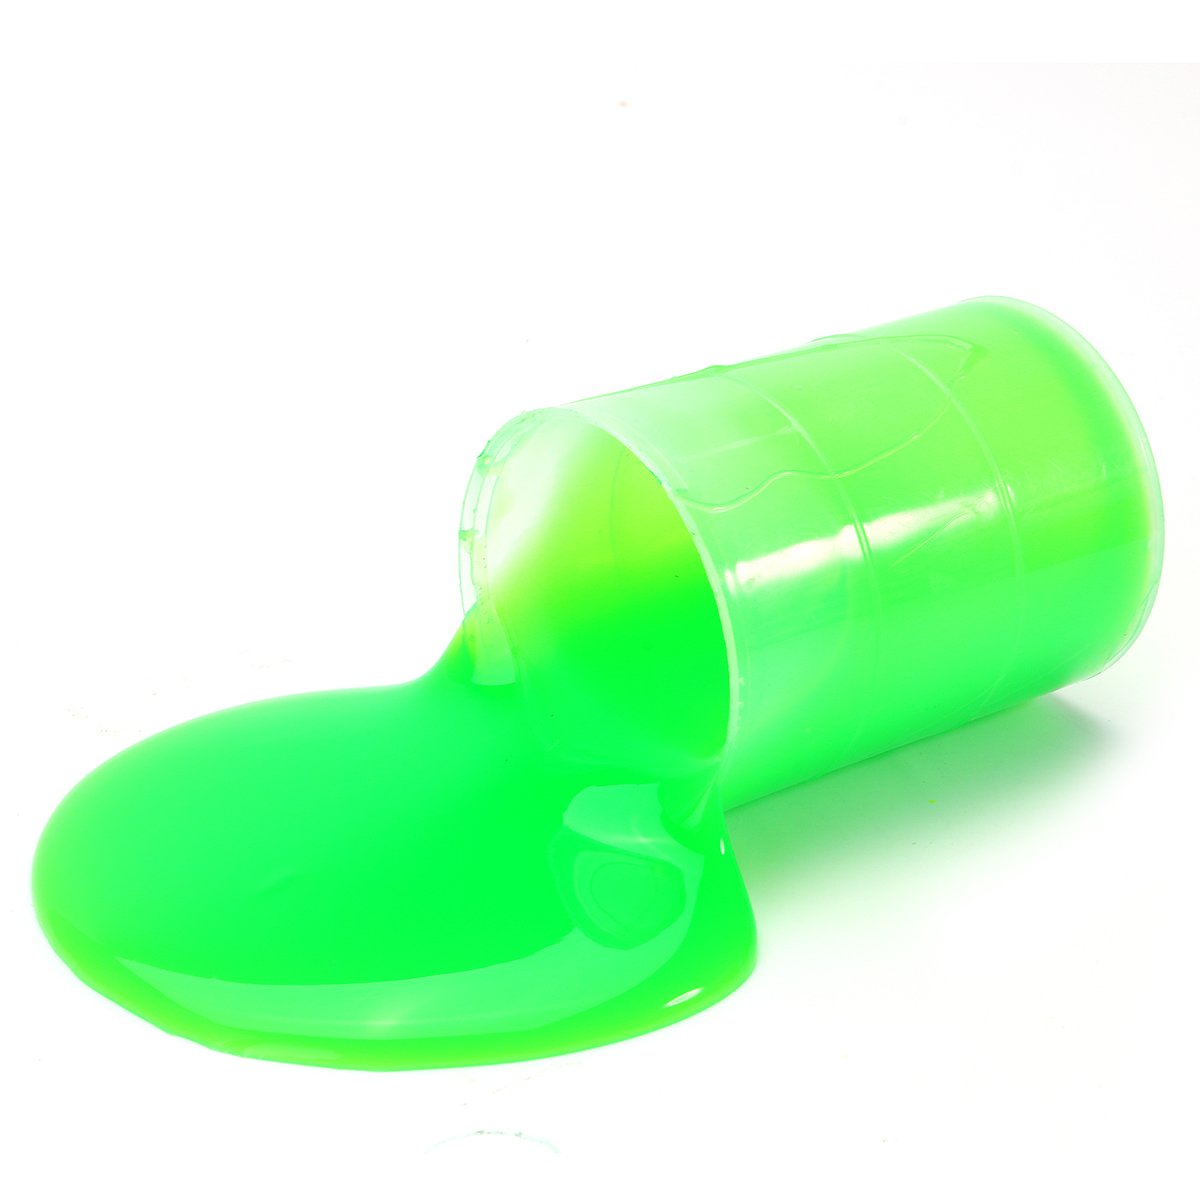 KCASA KCDL2 120ml Tricky Slime Snot Mud Toy Assorted Neon For Kids Filler B...